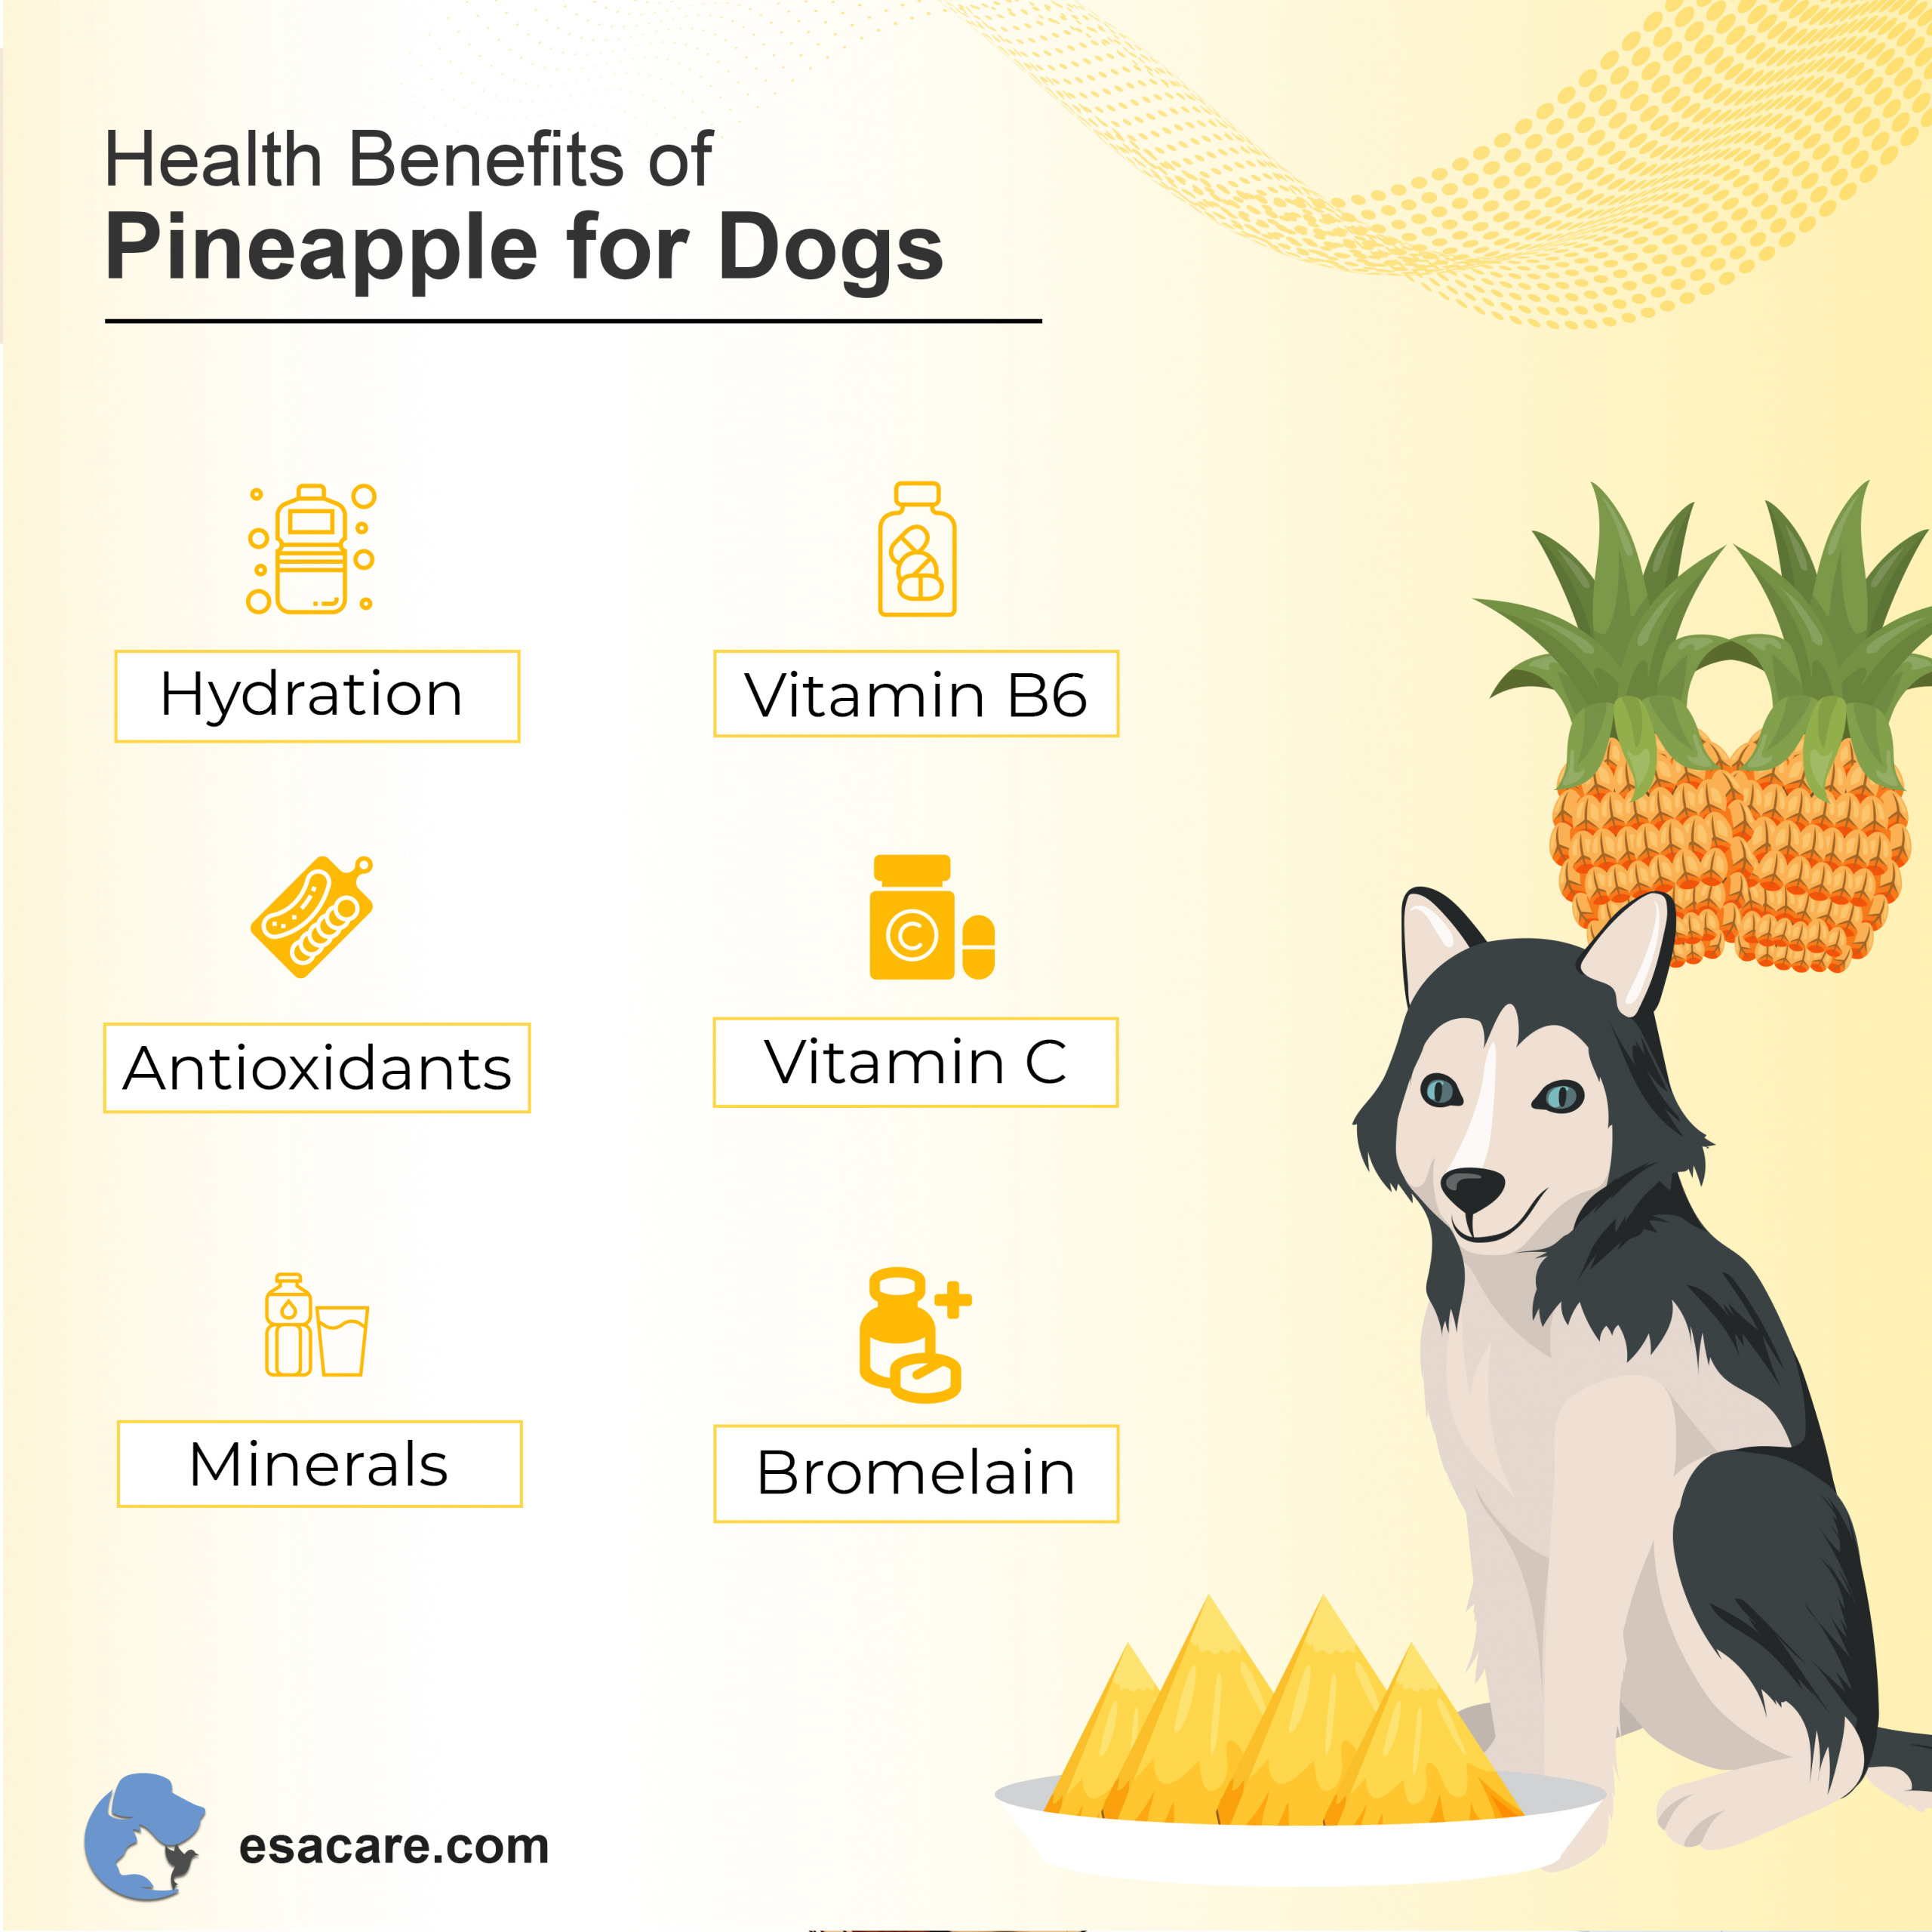 Pineapple for Dogs